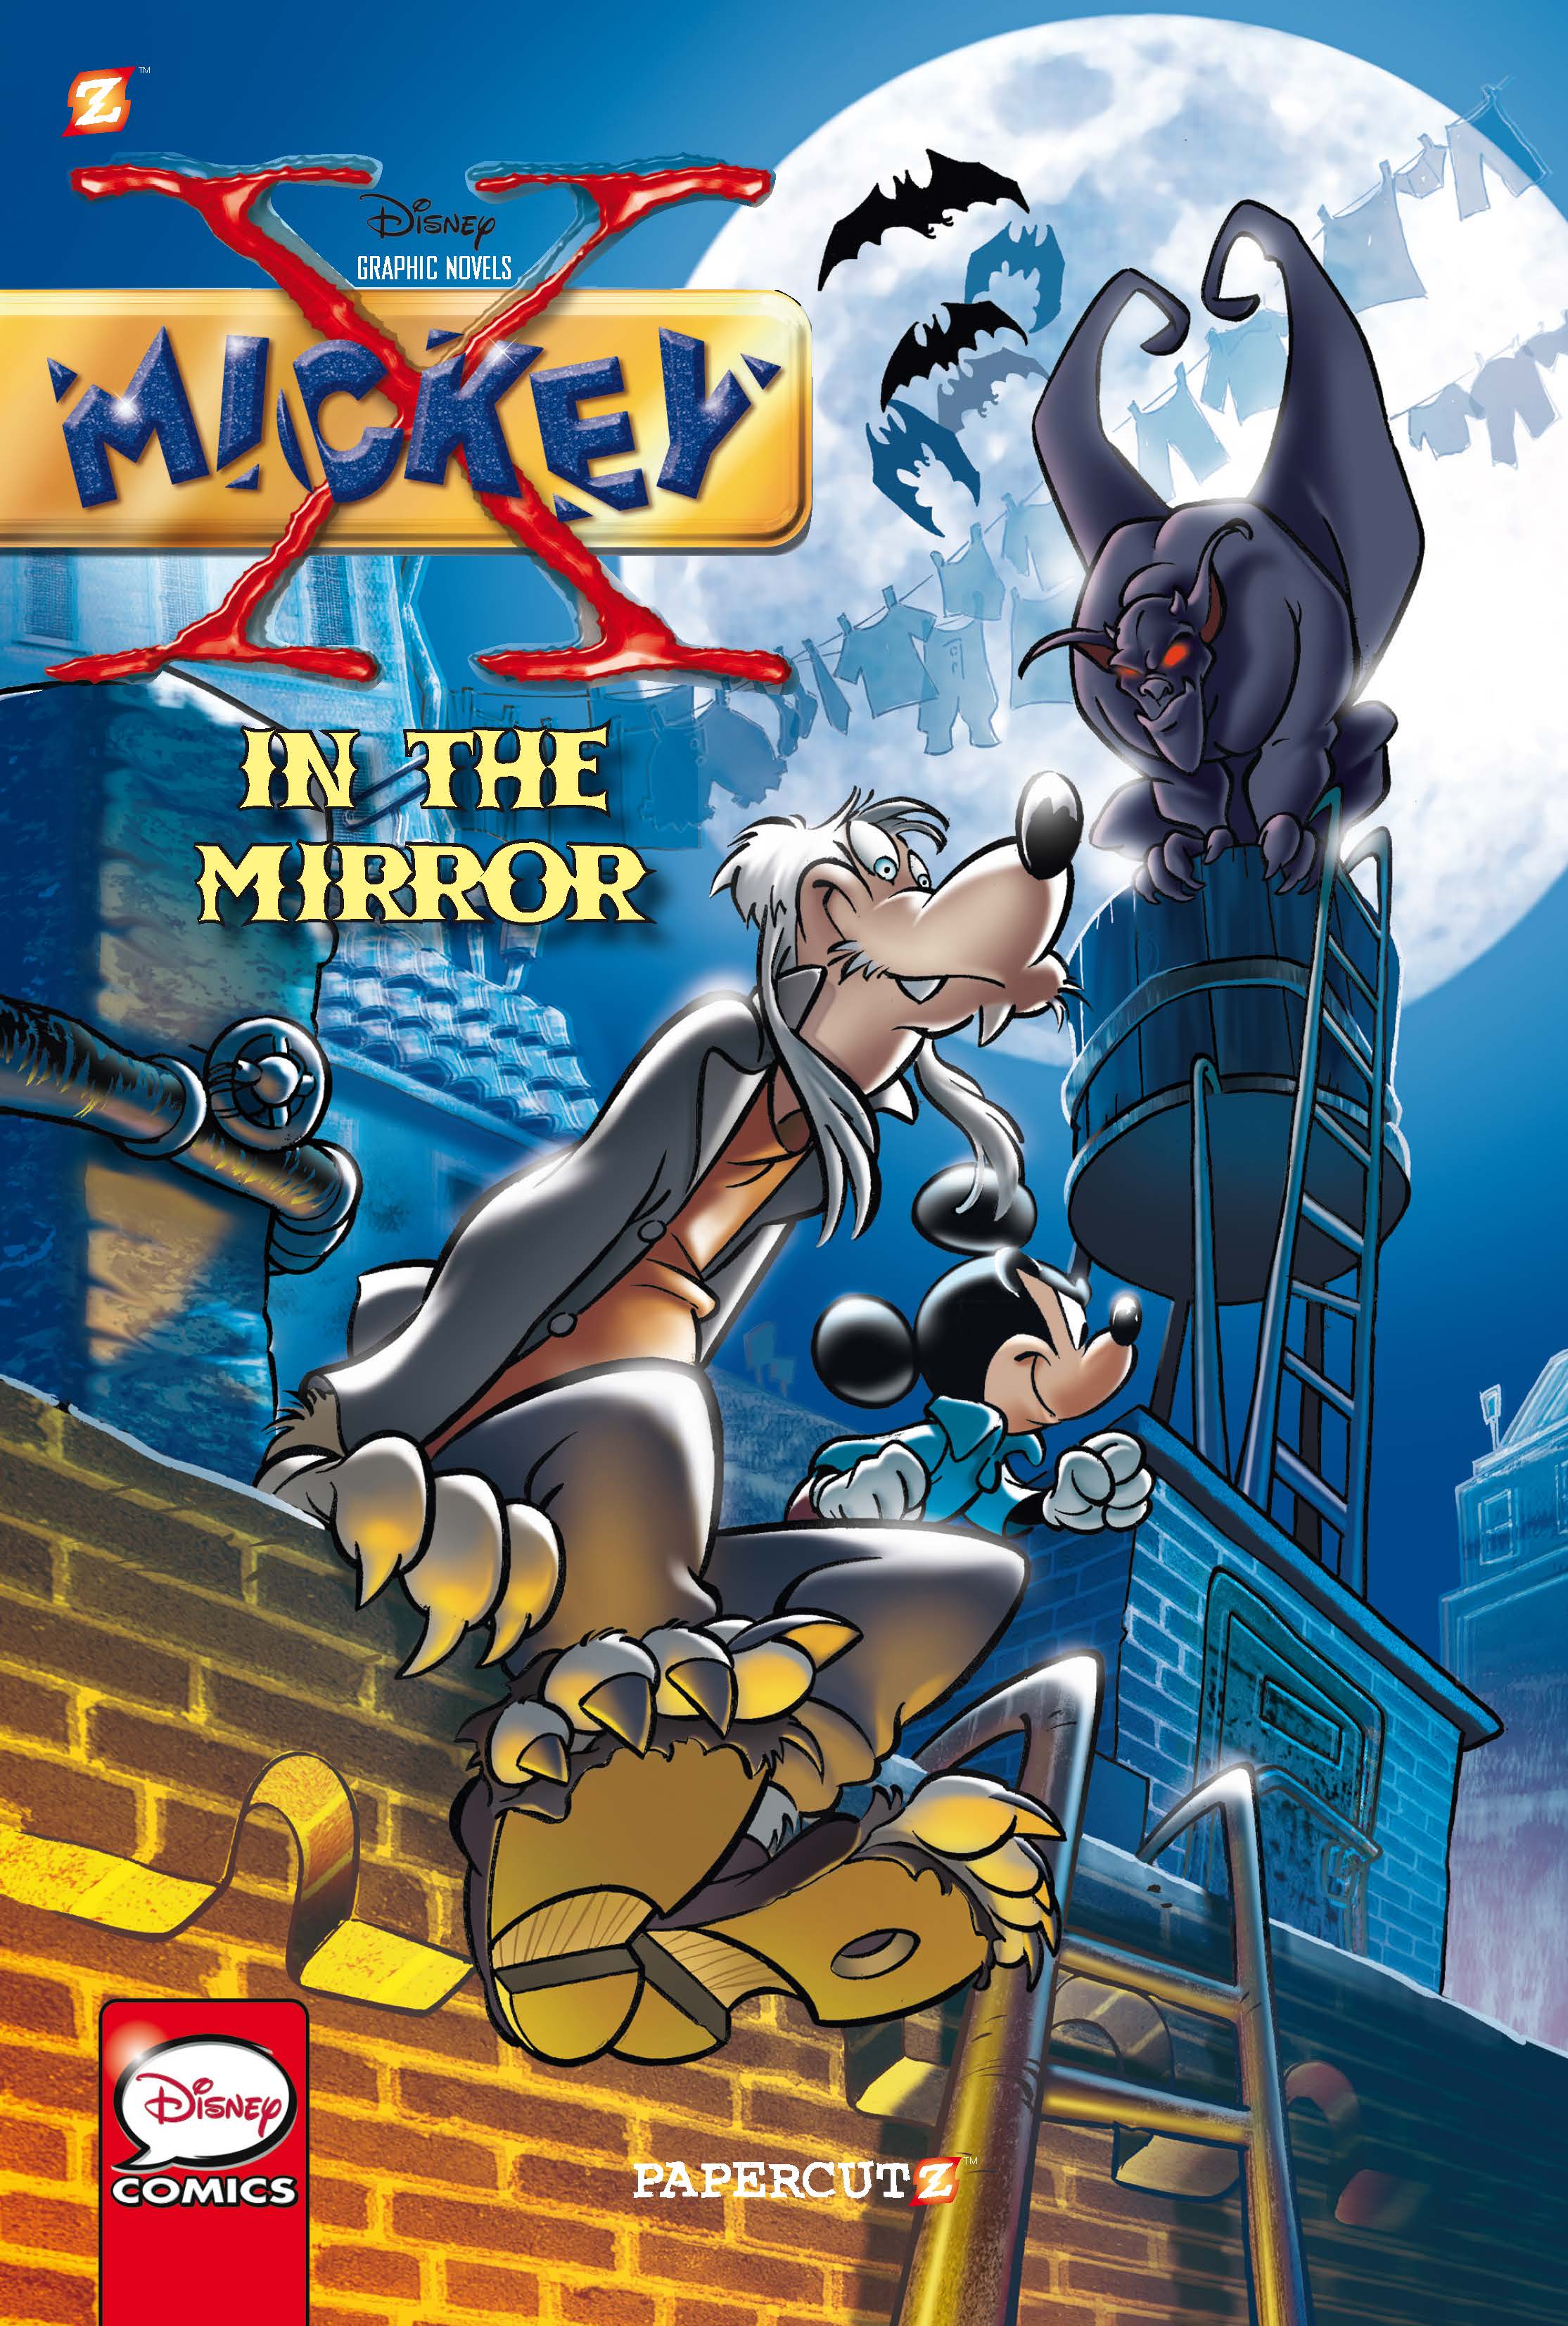 X-Mickey #1: “In the Mirror”